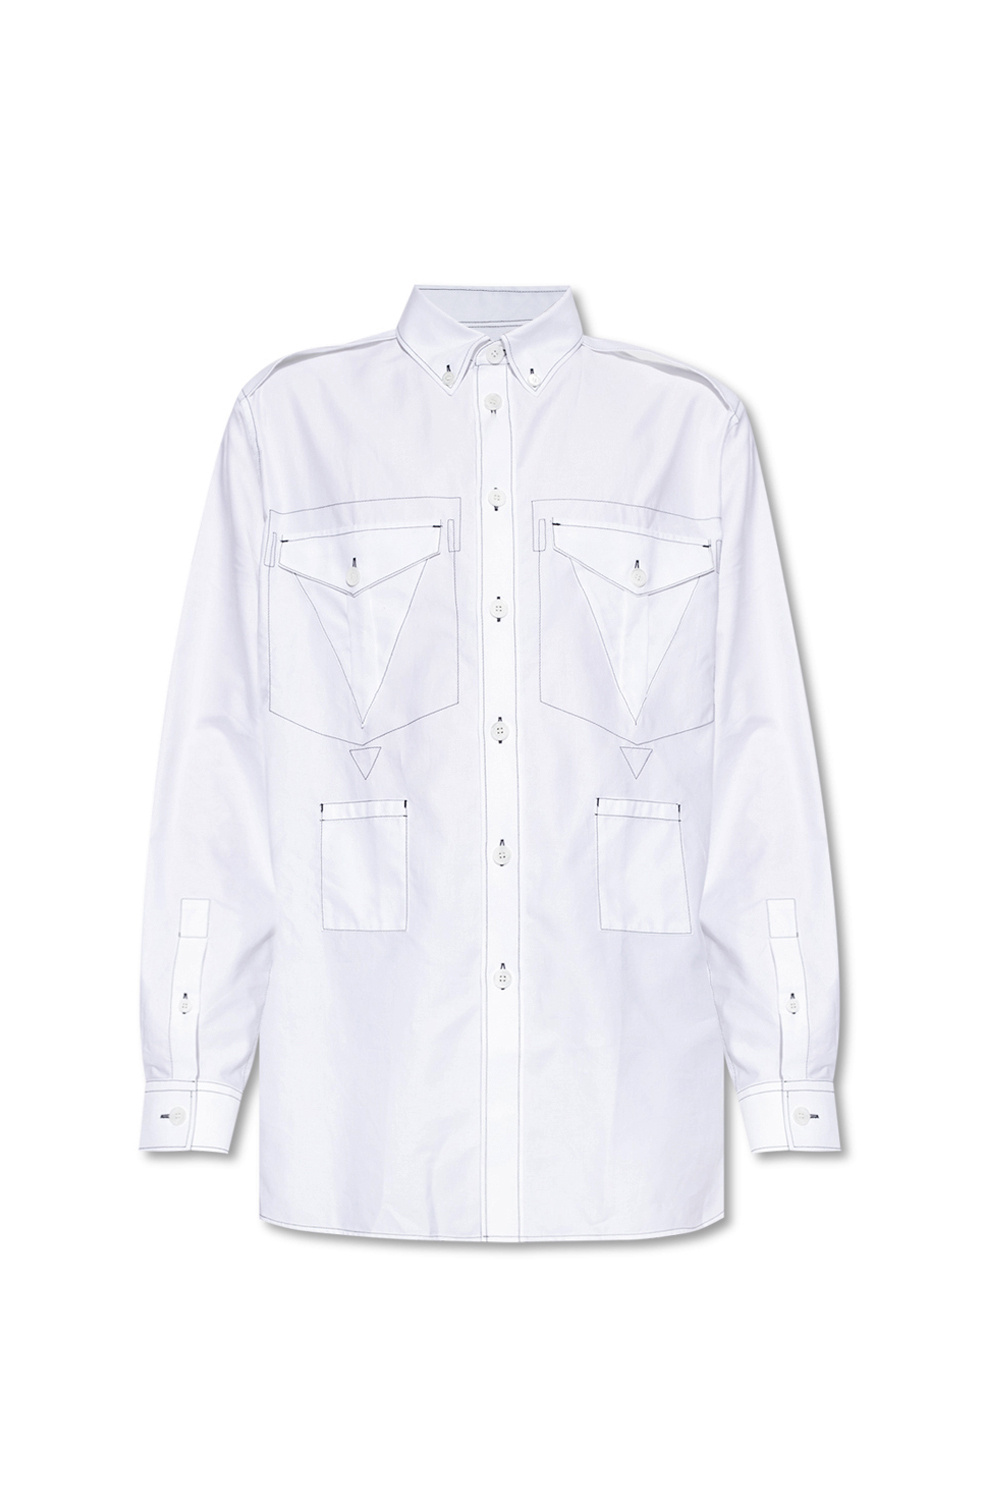 Burberry Top-stitched shirt